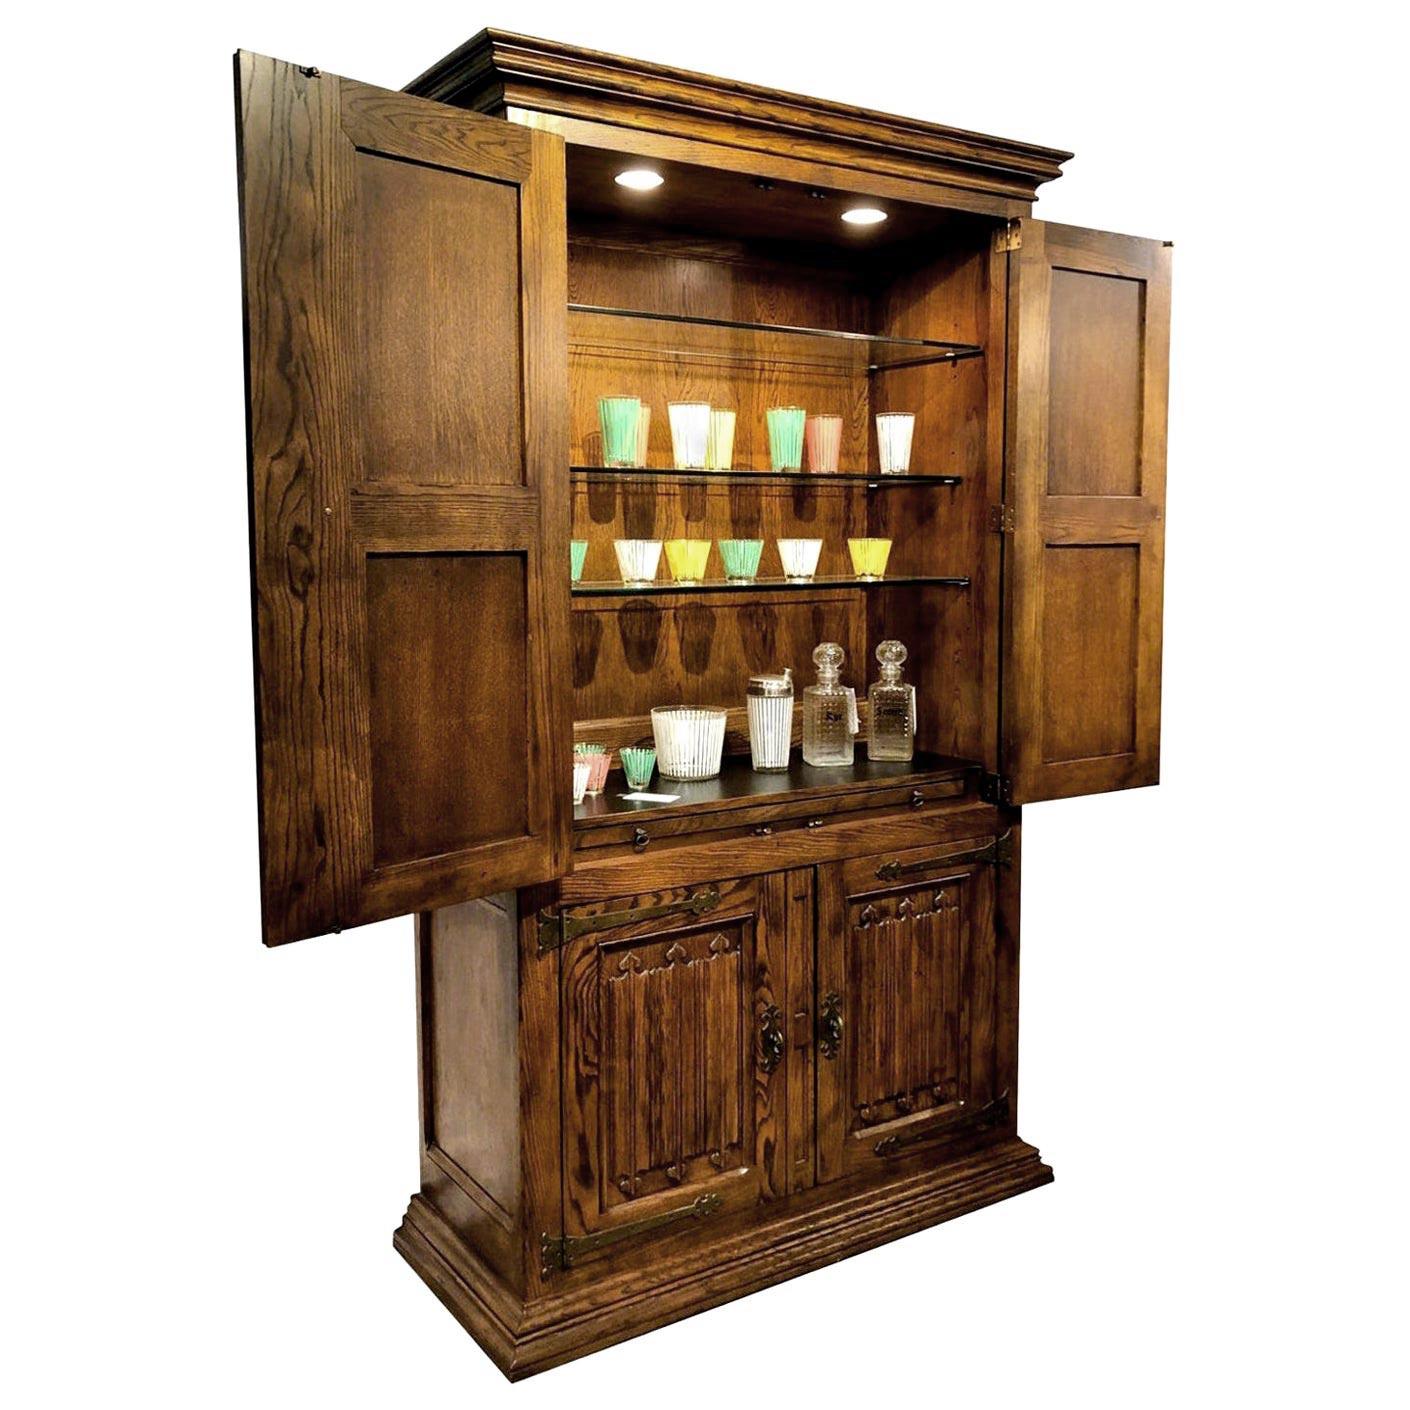 This stately bar cabinet by Henredon is the next best thing to owning your own speakeasy. This massive monolith of masculinity exudes luxury with its richly aged pecan wood. The decades old vintage liquor cabinet features ornate wood doors and trim